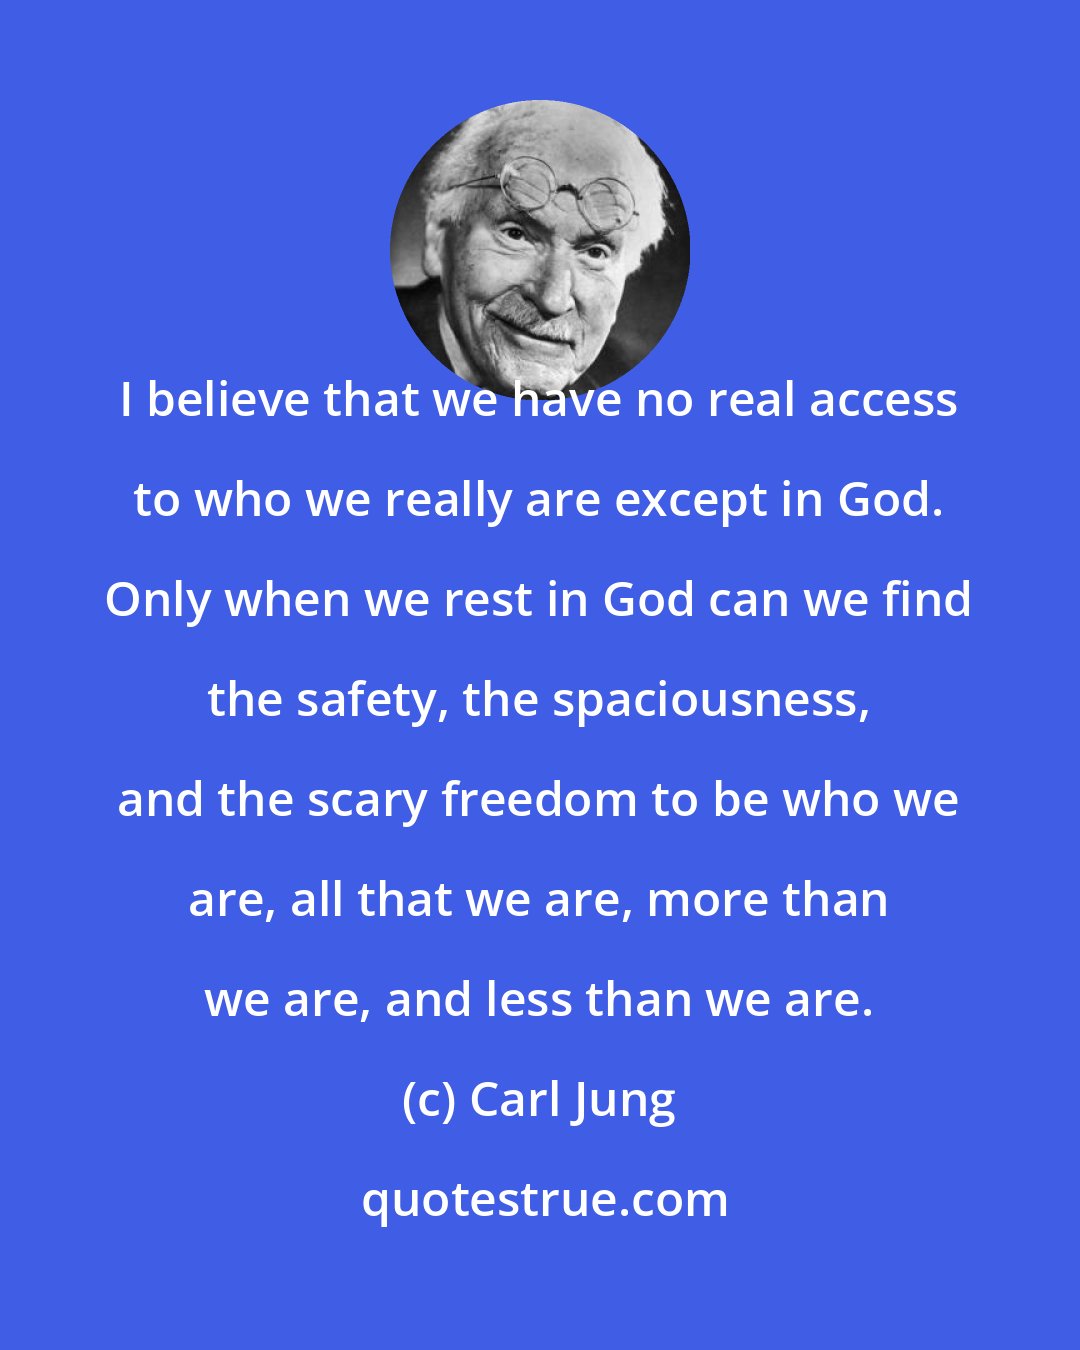 Carl Jung: I believe that we have no real access to who we really are except in God. Only when we rest in God can we find the safety, the spaciousness, and the scary freedom to be who we are, all that we are, more than we are, and less than we are.